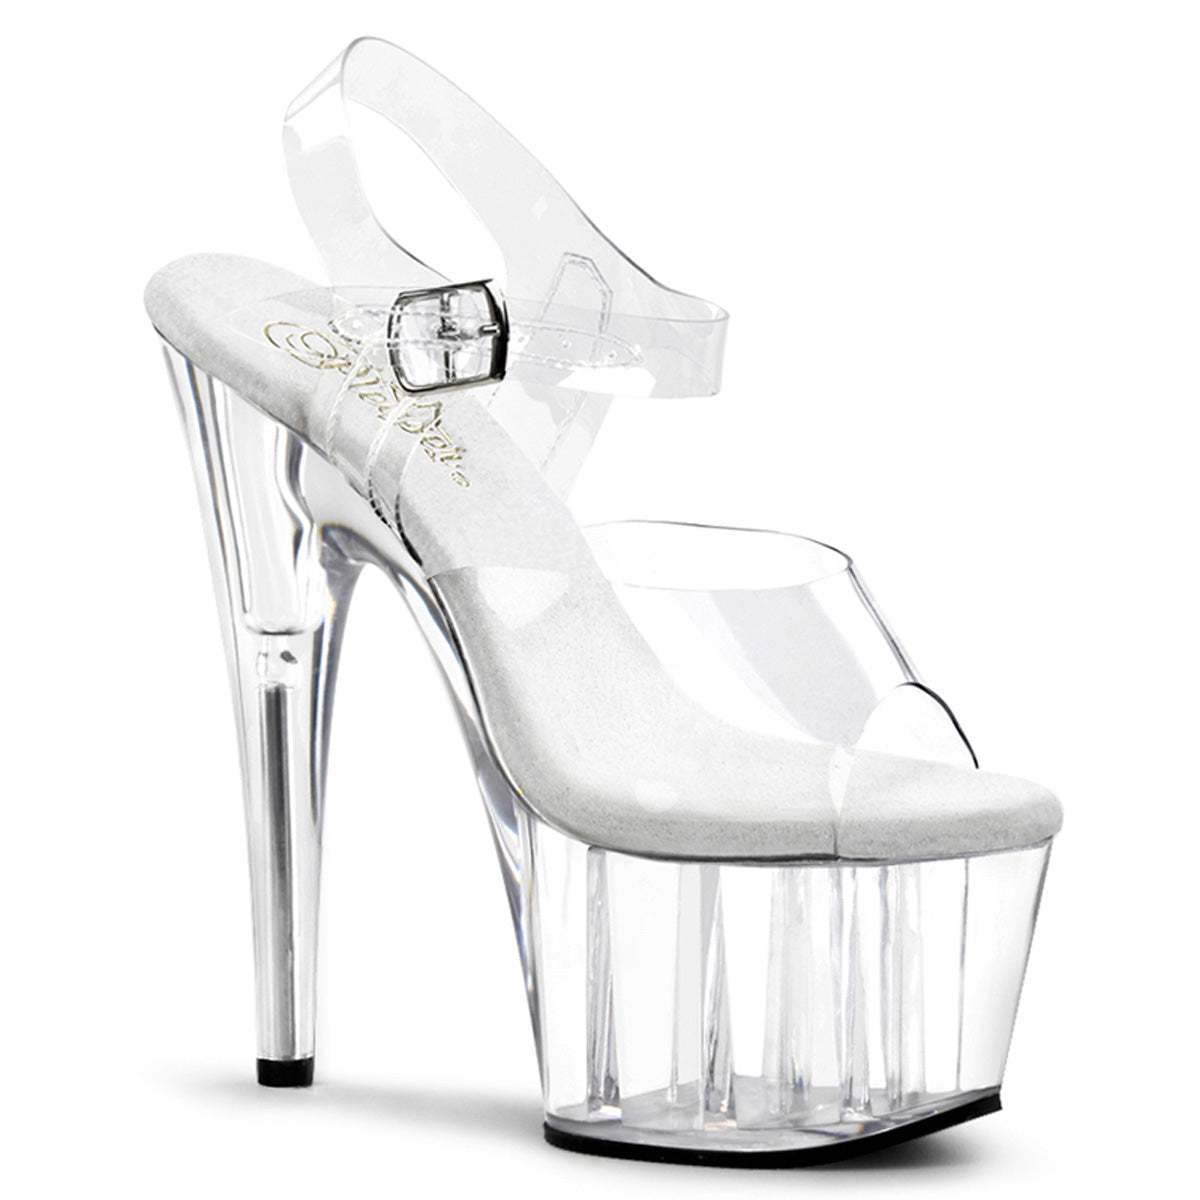 ADORE-708 Pleasers 7 Inch Heel Clear Sexy Sandals